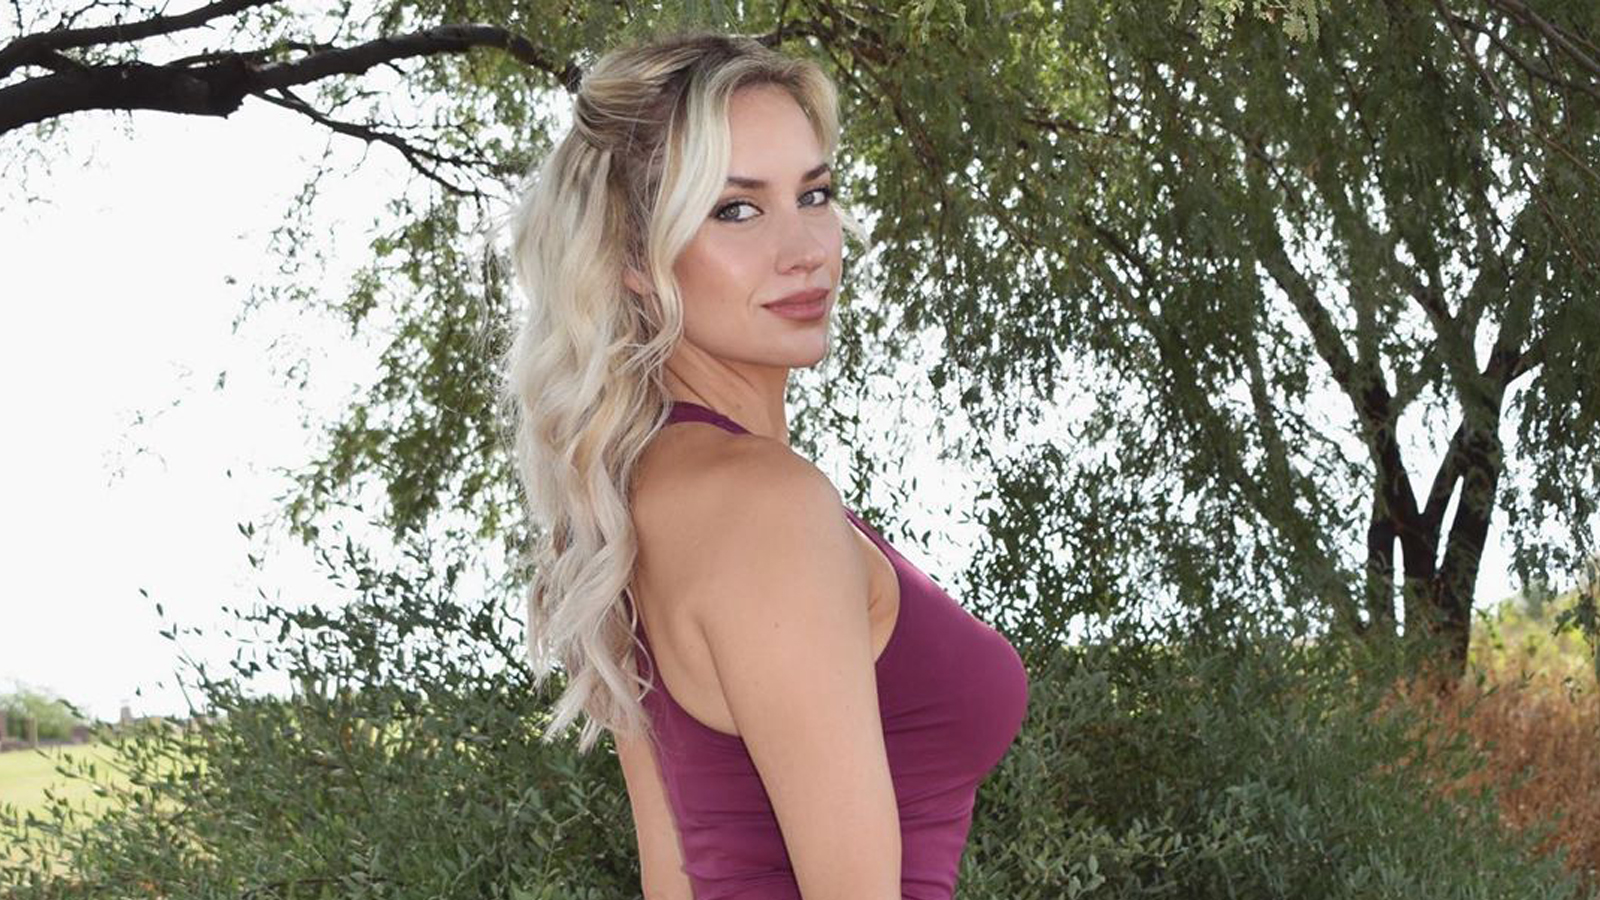 Former Pro Golfer Paige Spiranac Claims Dates Would Use 